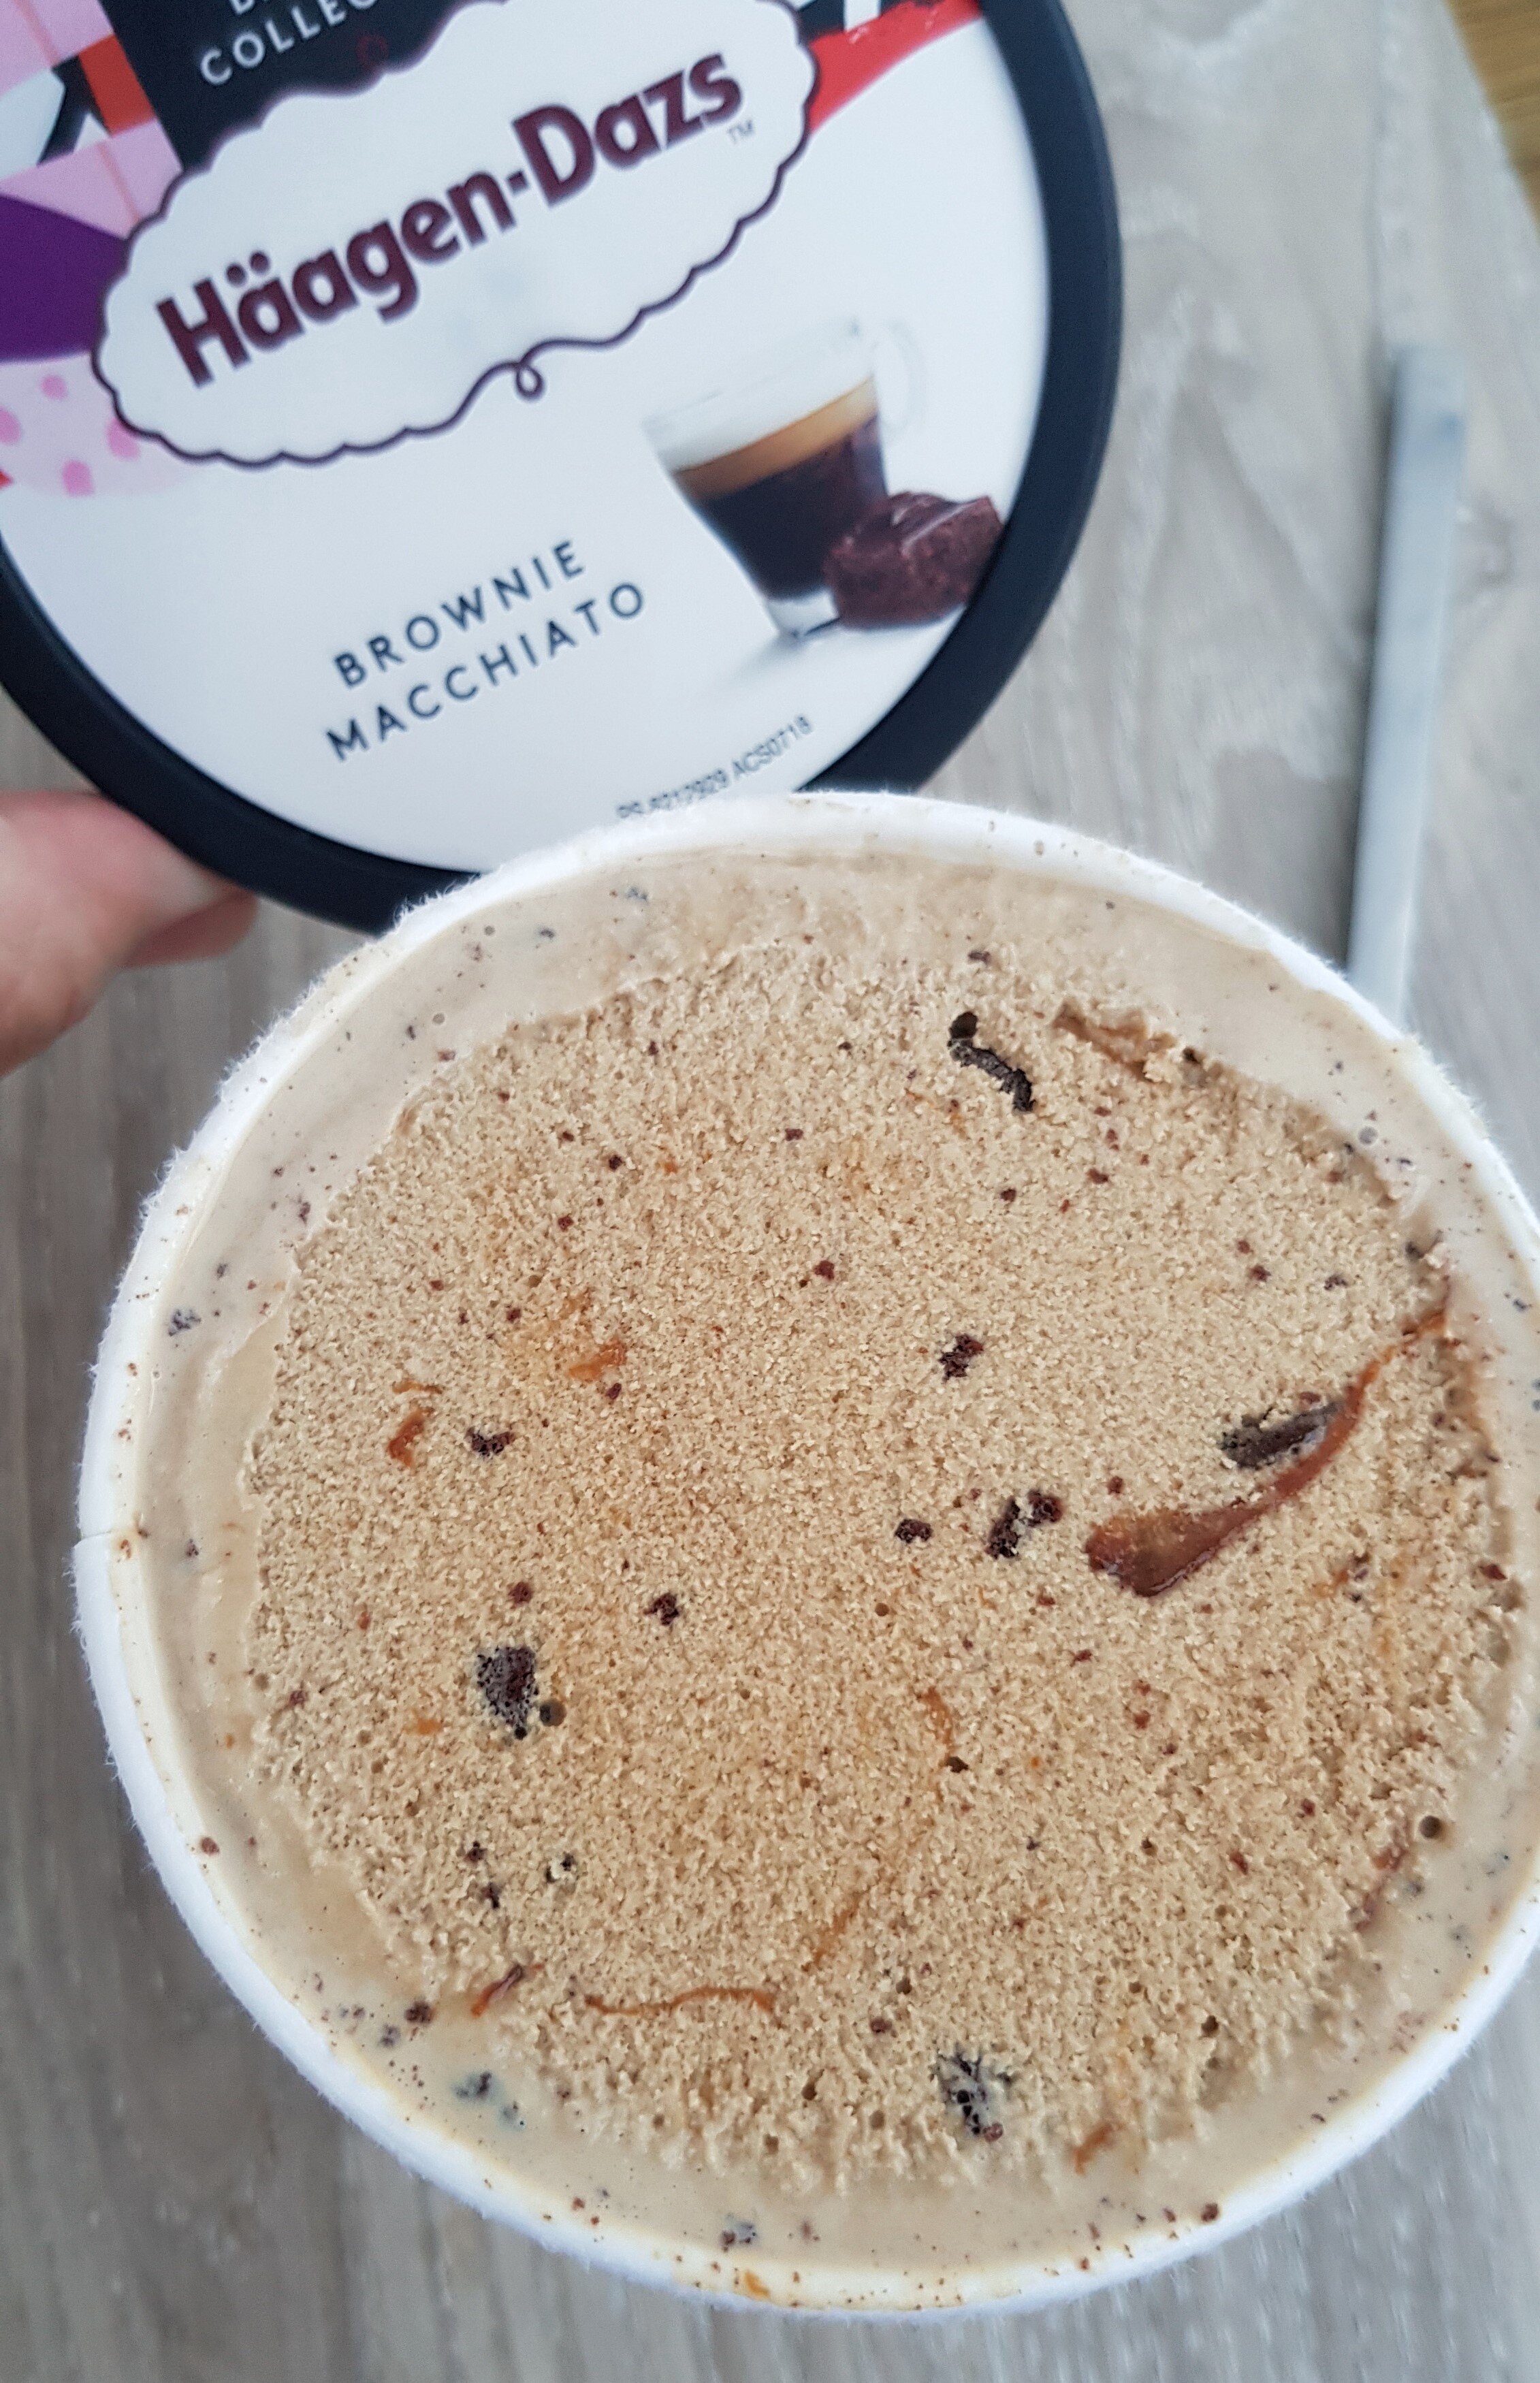 Haagen Dazs Brownie Macchiato Ice Cream Review King Of Cheat Meals Food Blog Auckland New Zealand